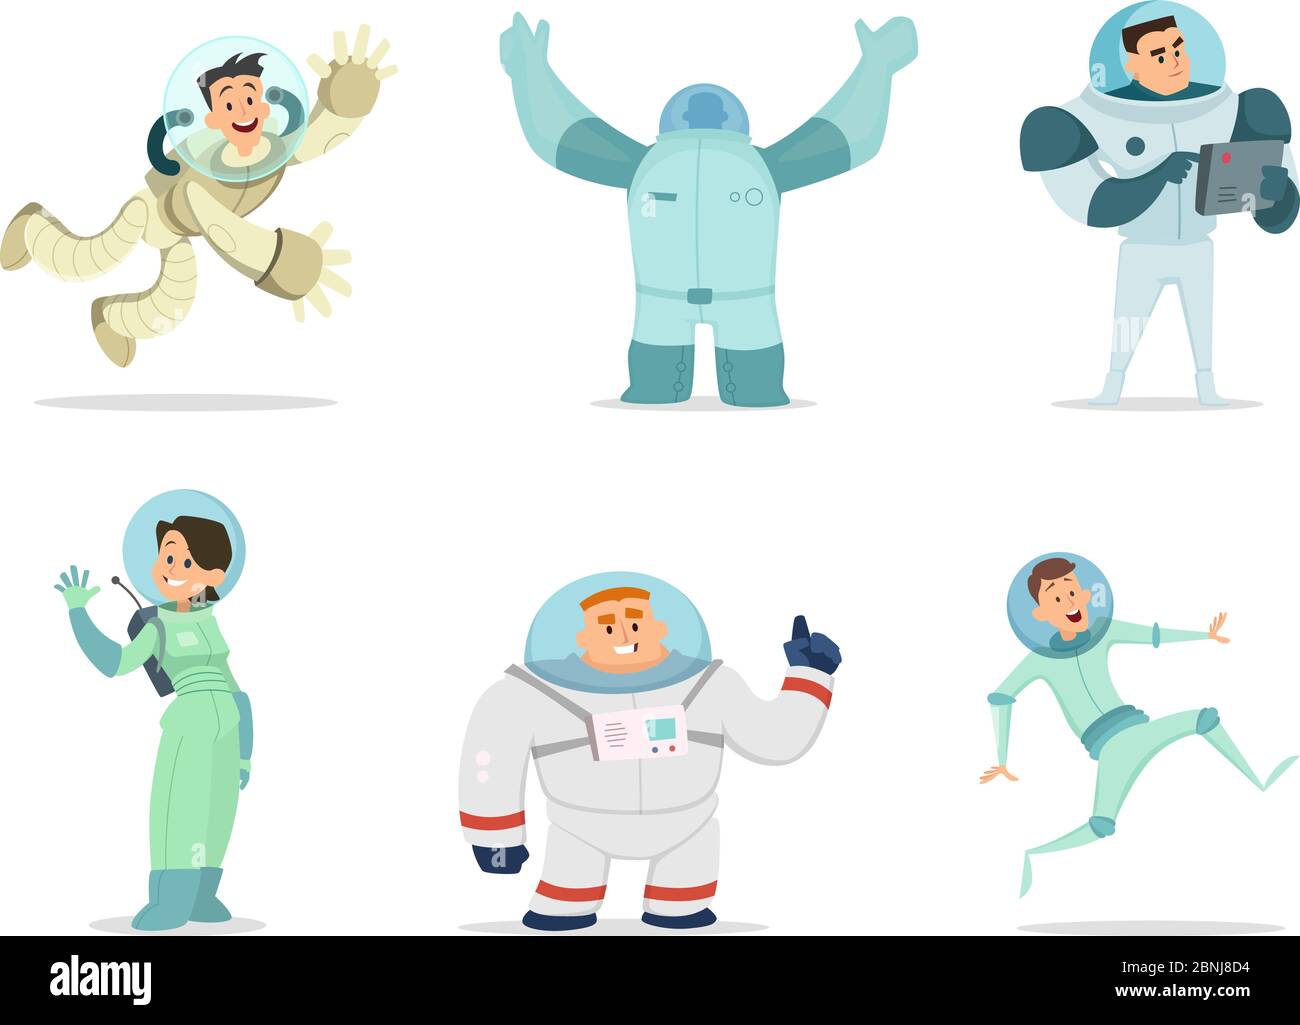 Space characters. Mascots of astronauts in cartoon style Stock Vector